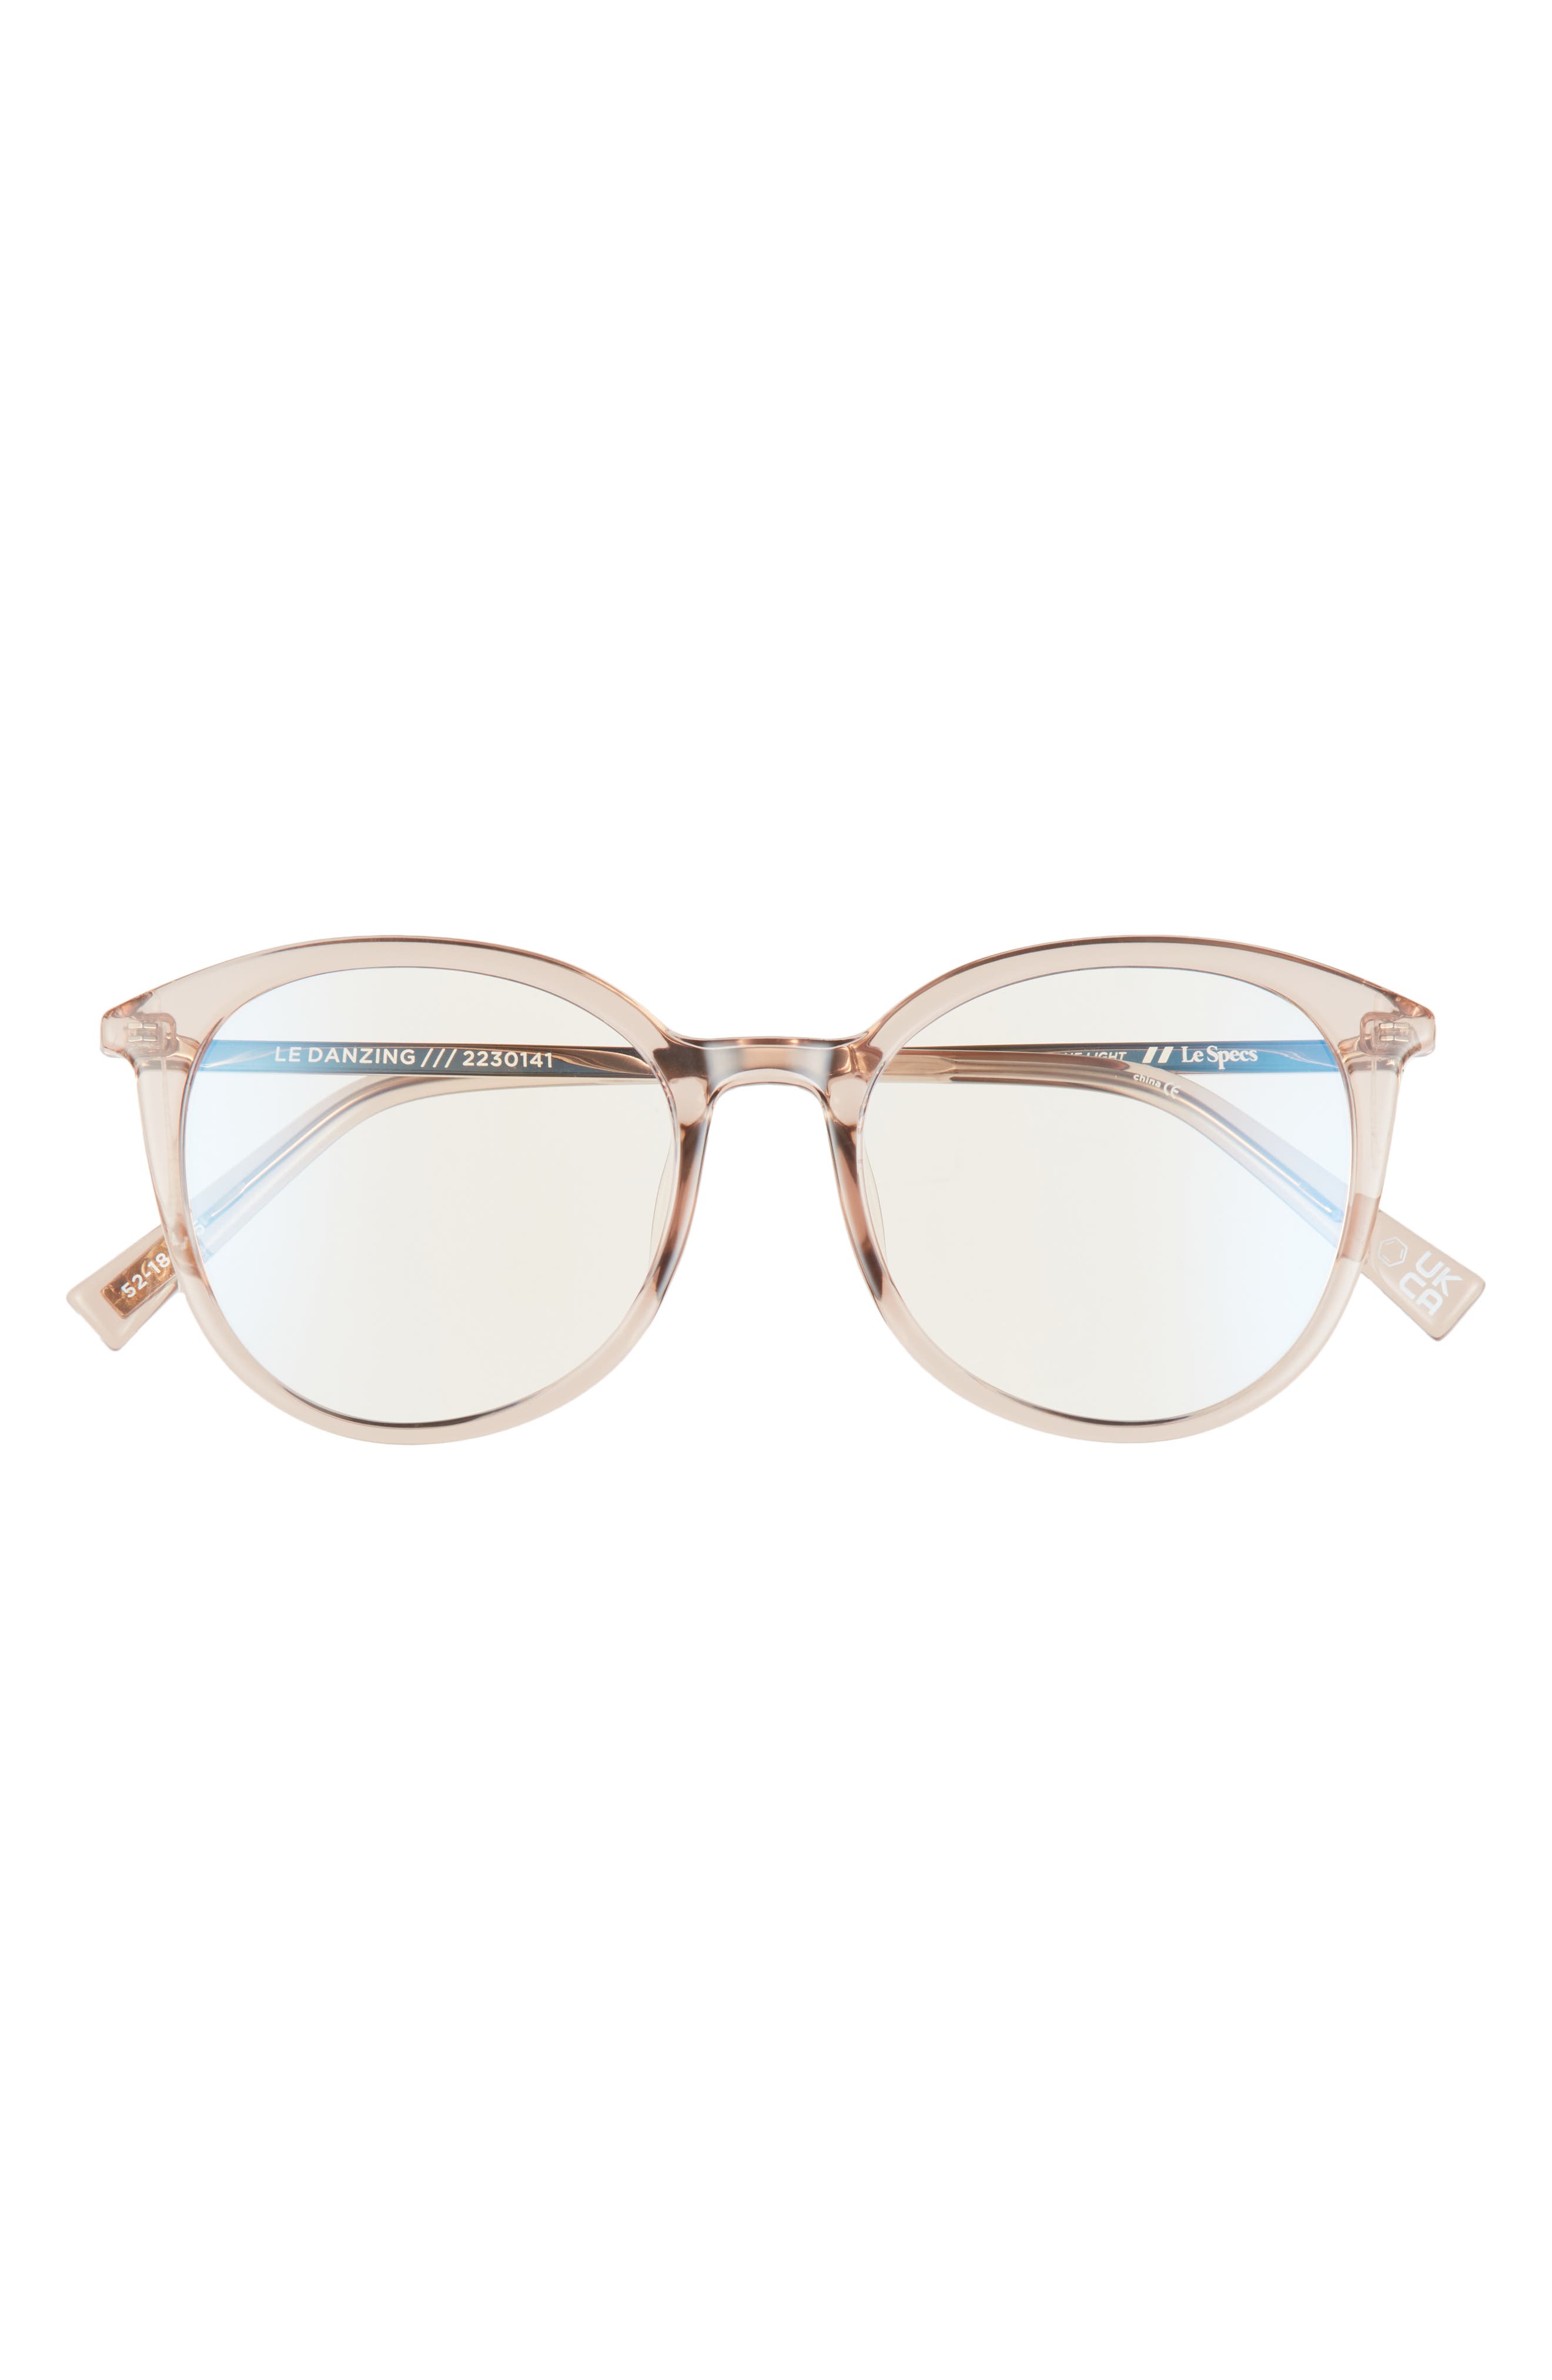 Le Specs Le Danzing 52mm Round Blue Light Blocking Glasses in Rosewater Rosegold Blue Light at Nordstrom